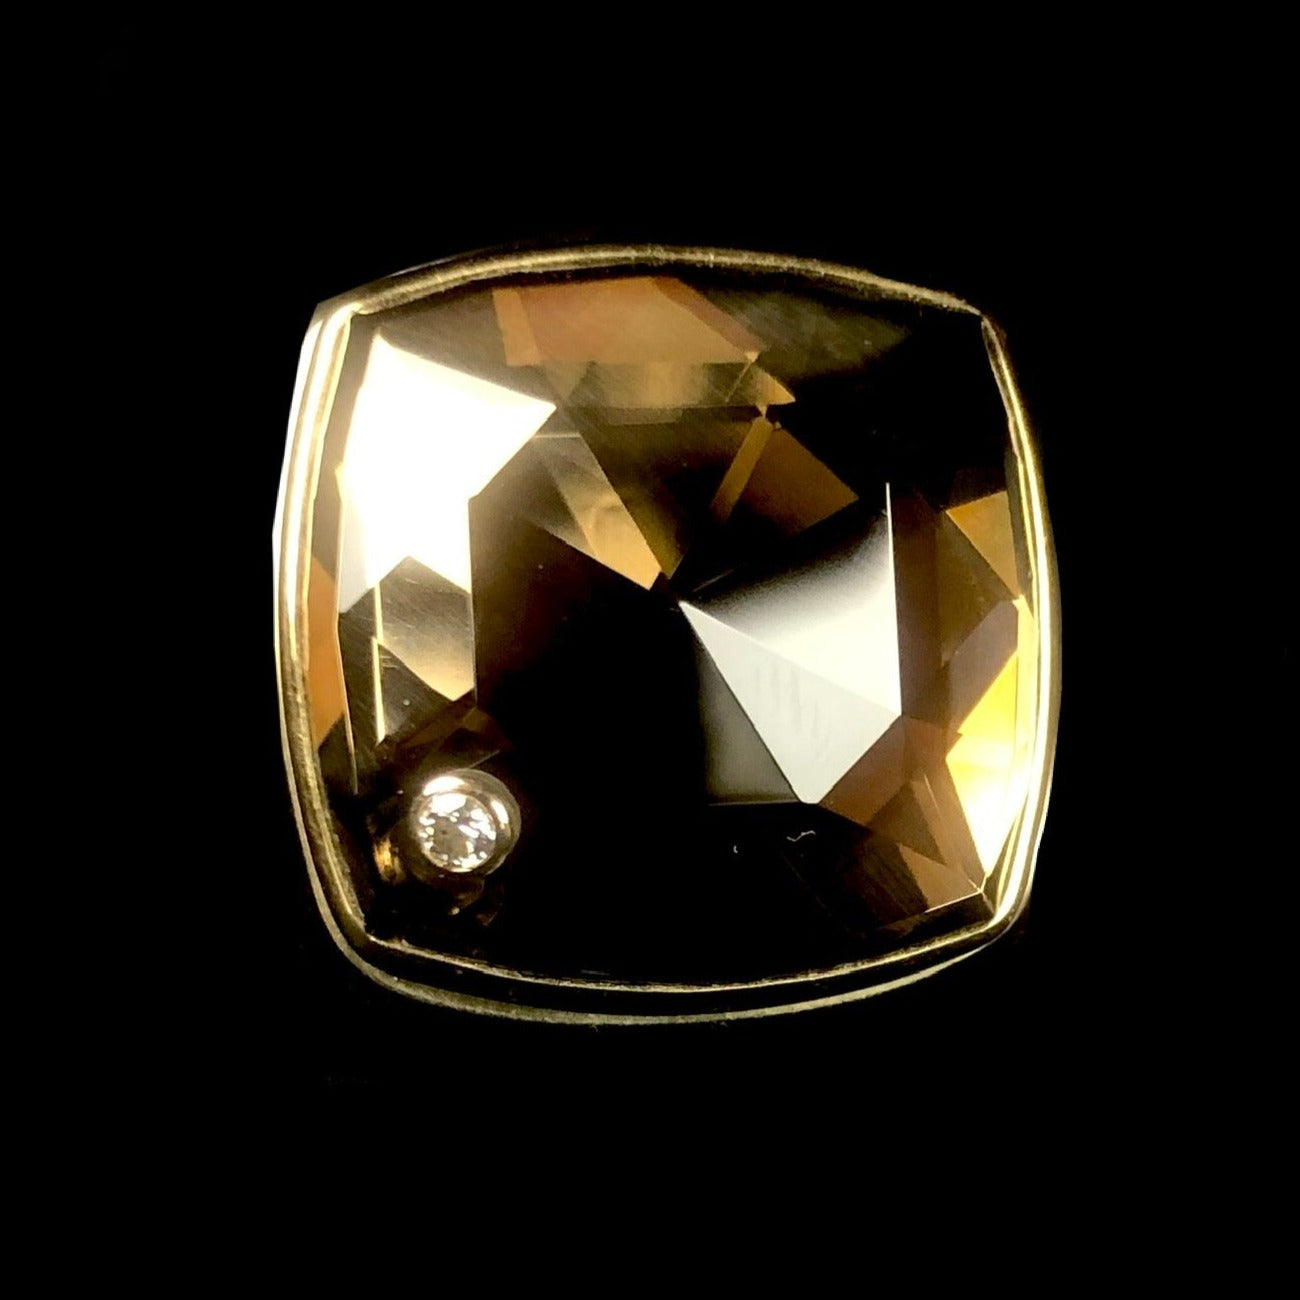 Smokey grey/brown stone ring with shining faceted surface and diamond accent